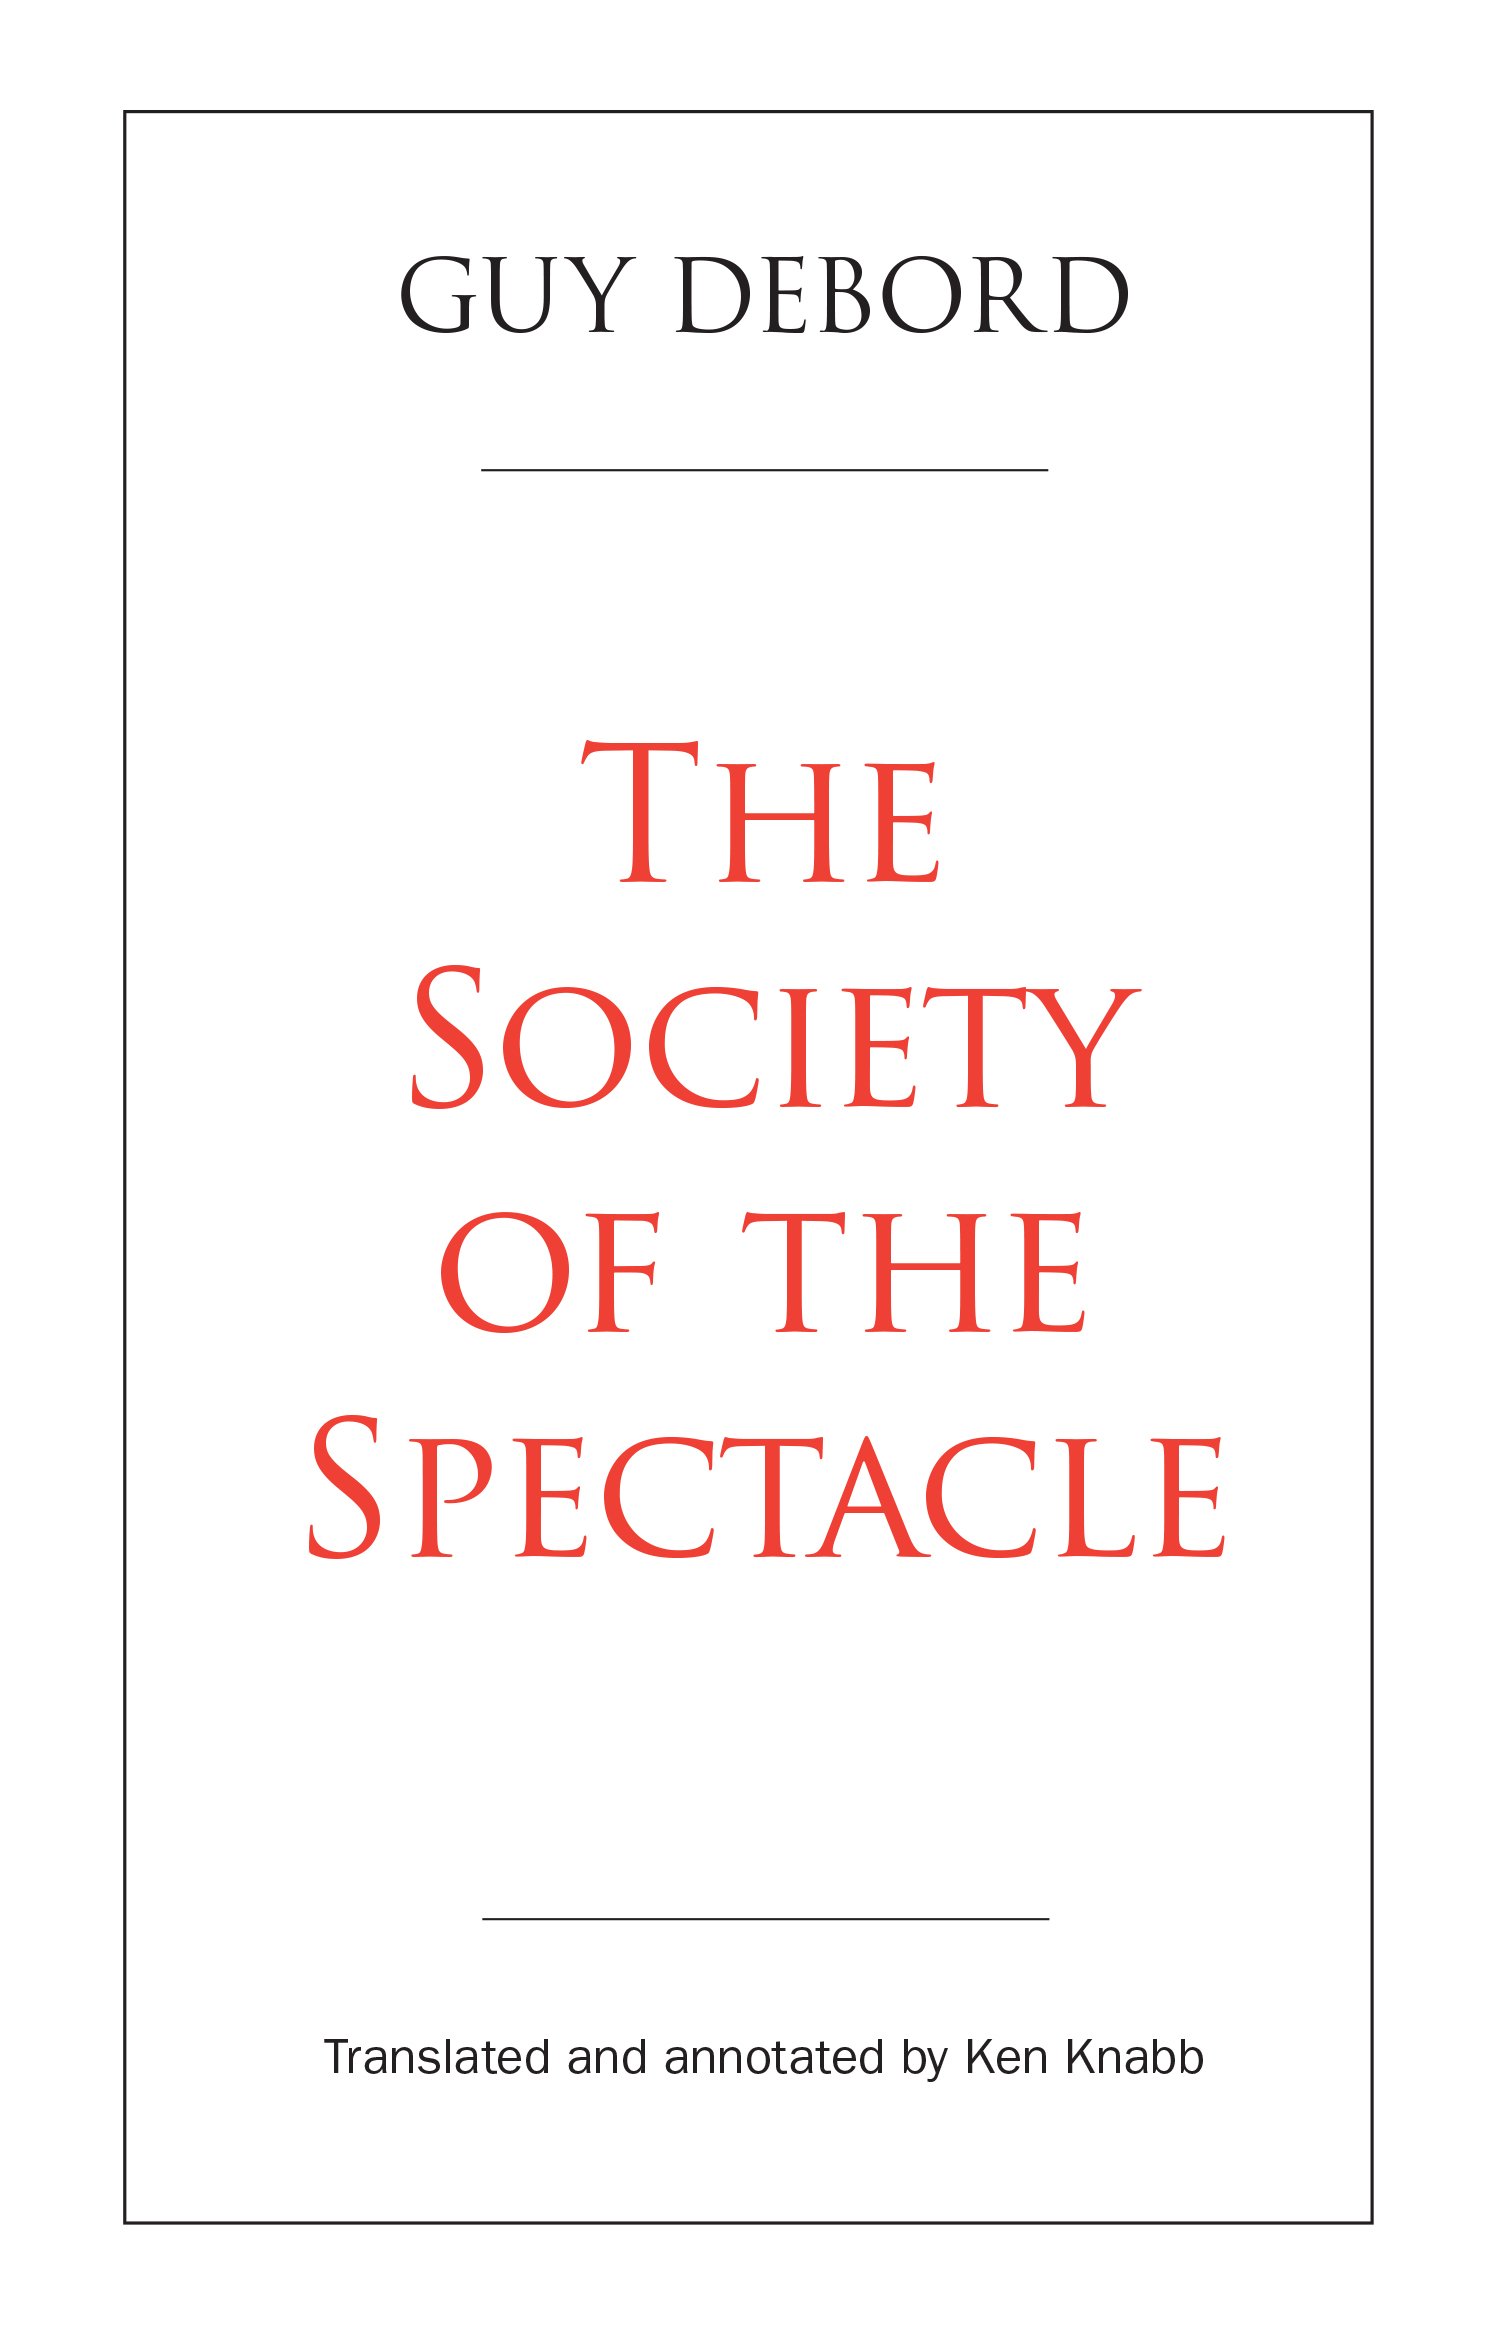 Library_Society of Spectacle.jpg